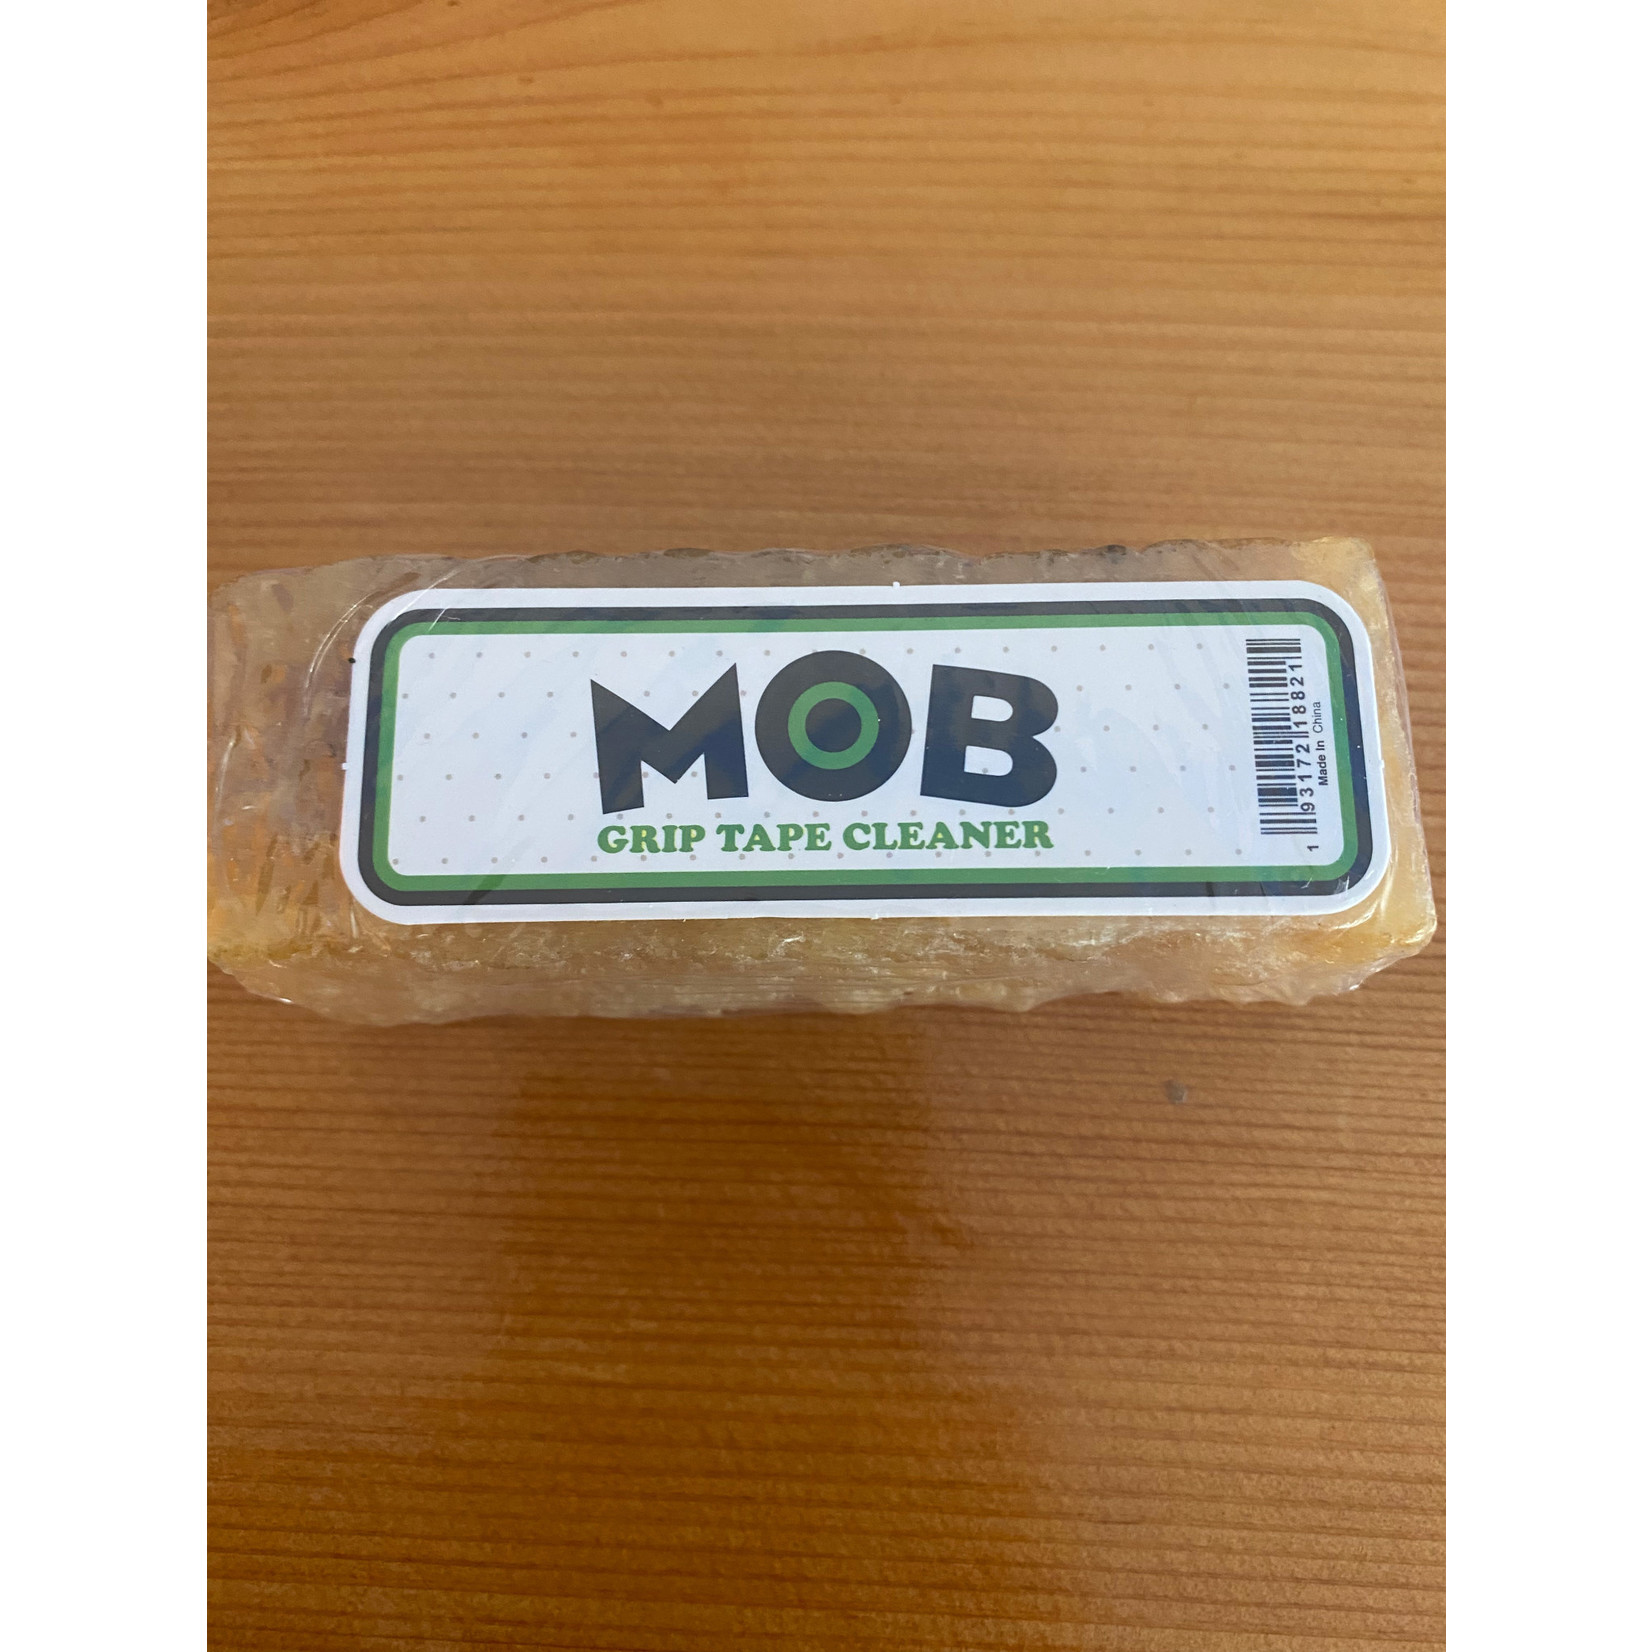 Mob Grip Tape Cleaner